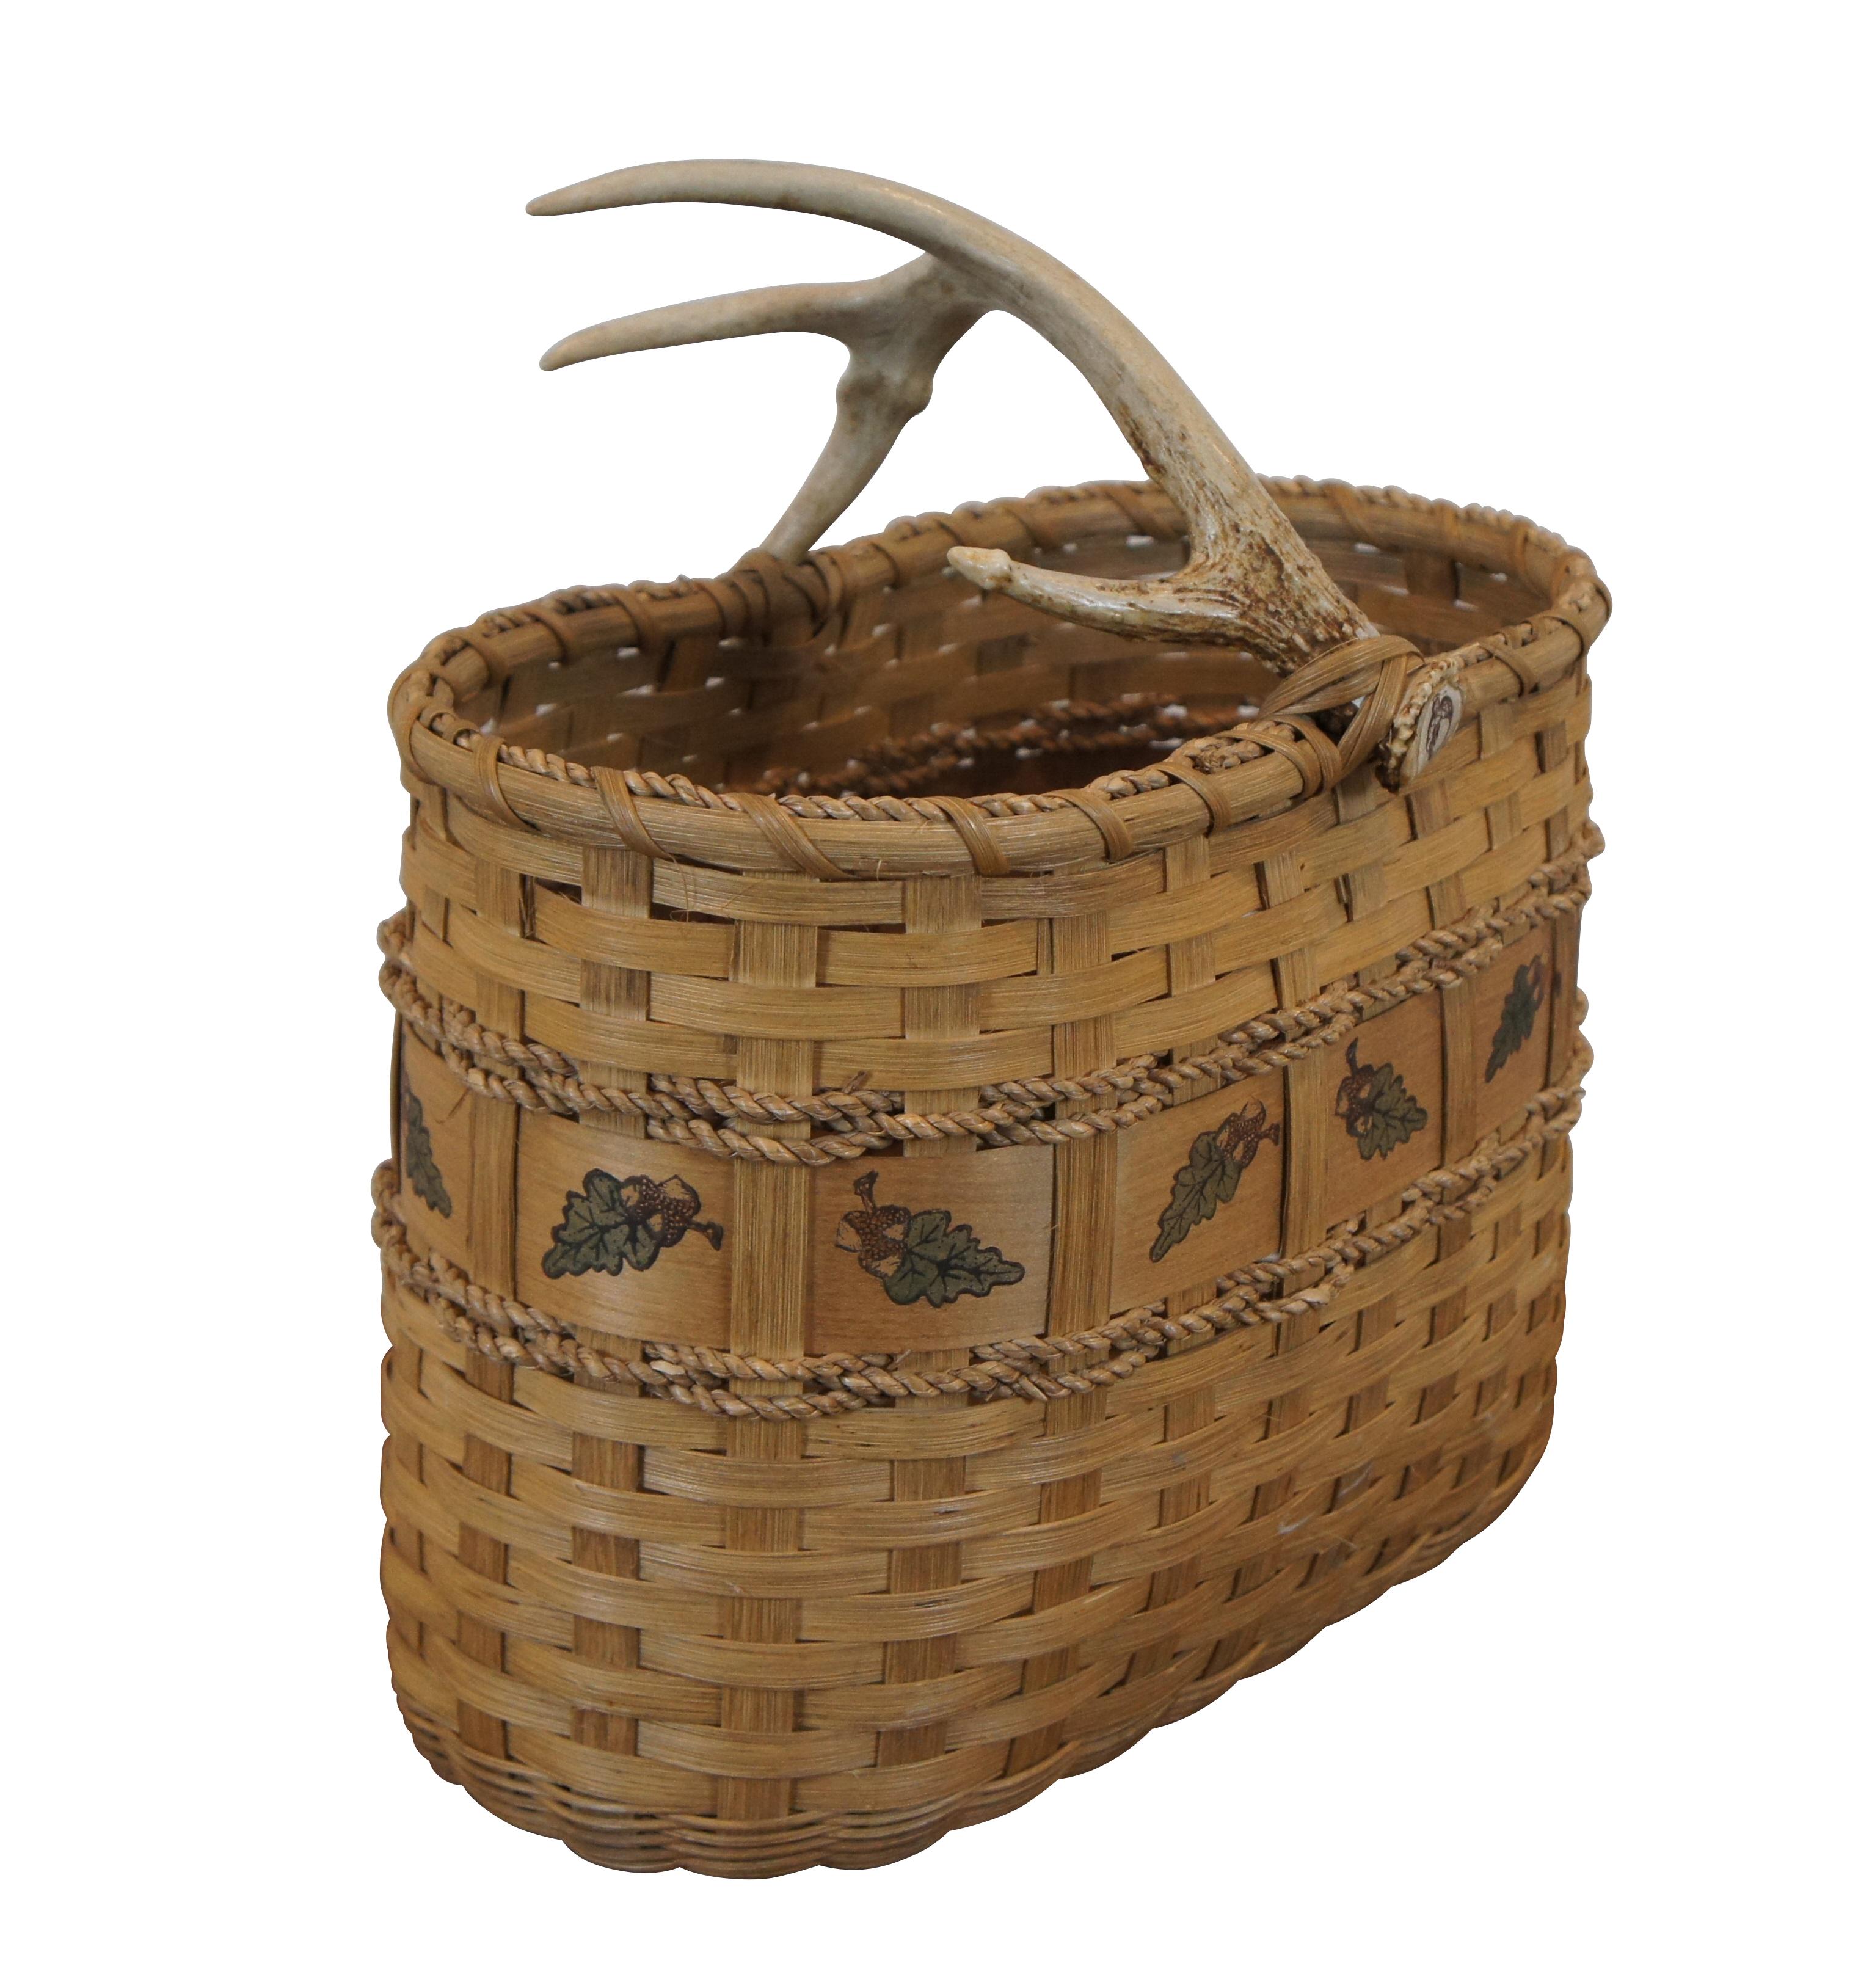 Large vintage wicker harvest basket featuring antler handle with acorn / leaf theme and rope twist accents.

Dimensions:
16” x 9.5” x 17” (Width x Depth x Height)